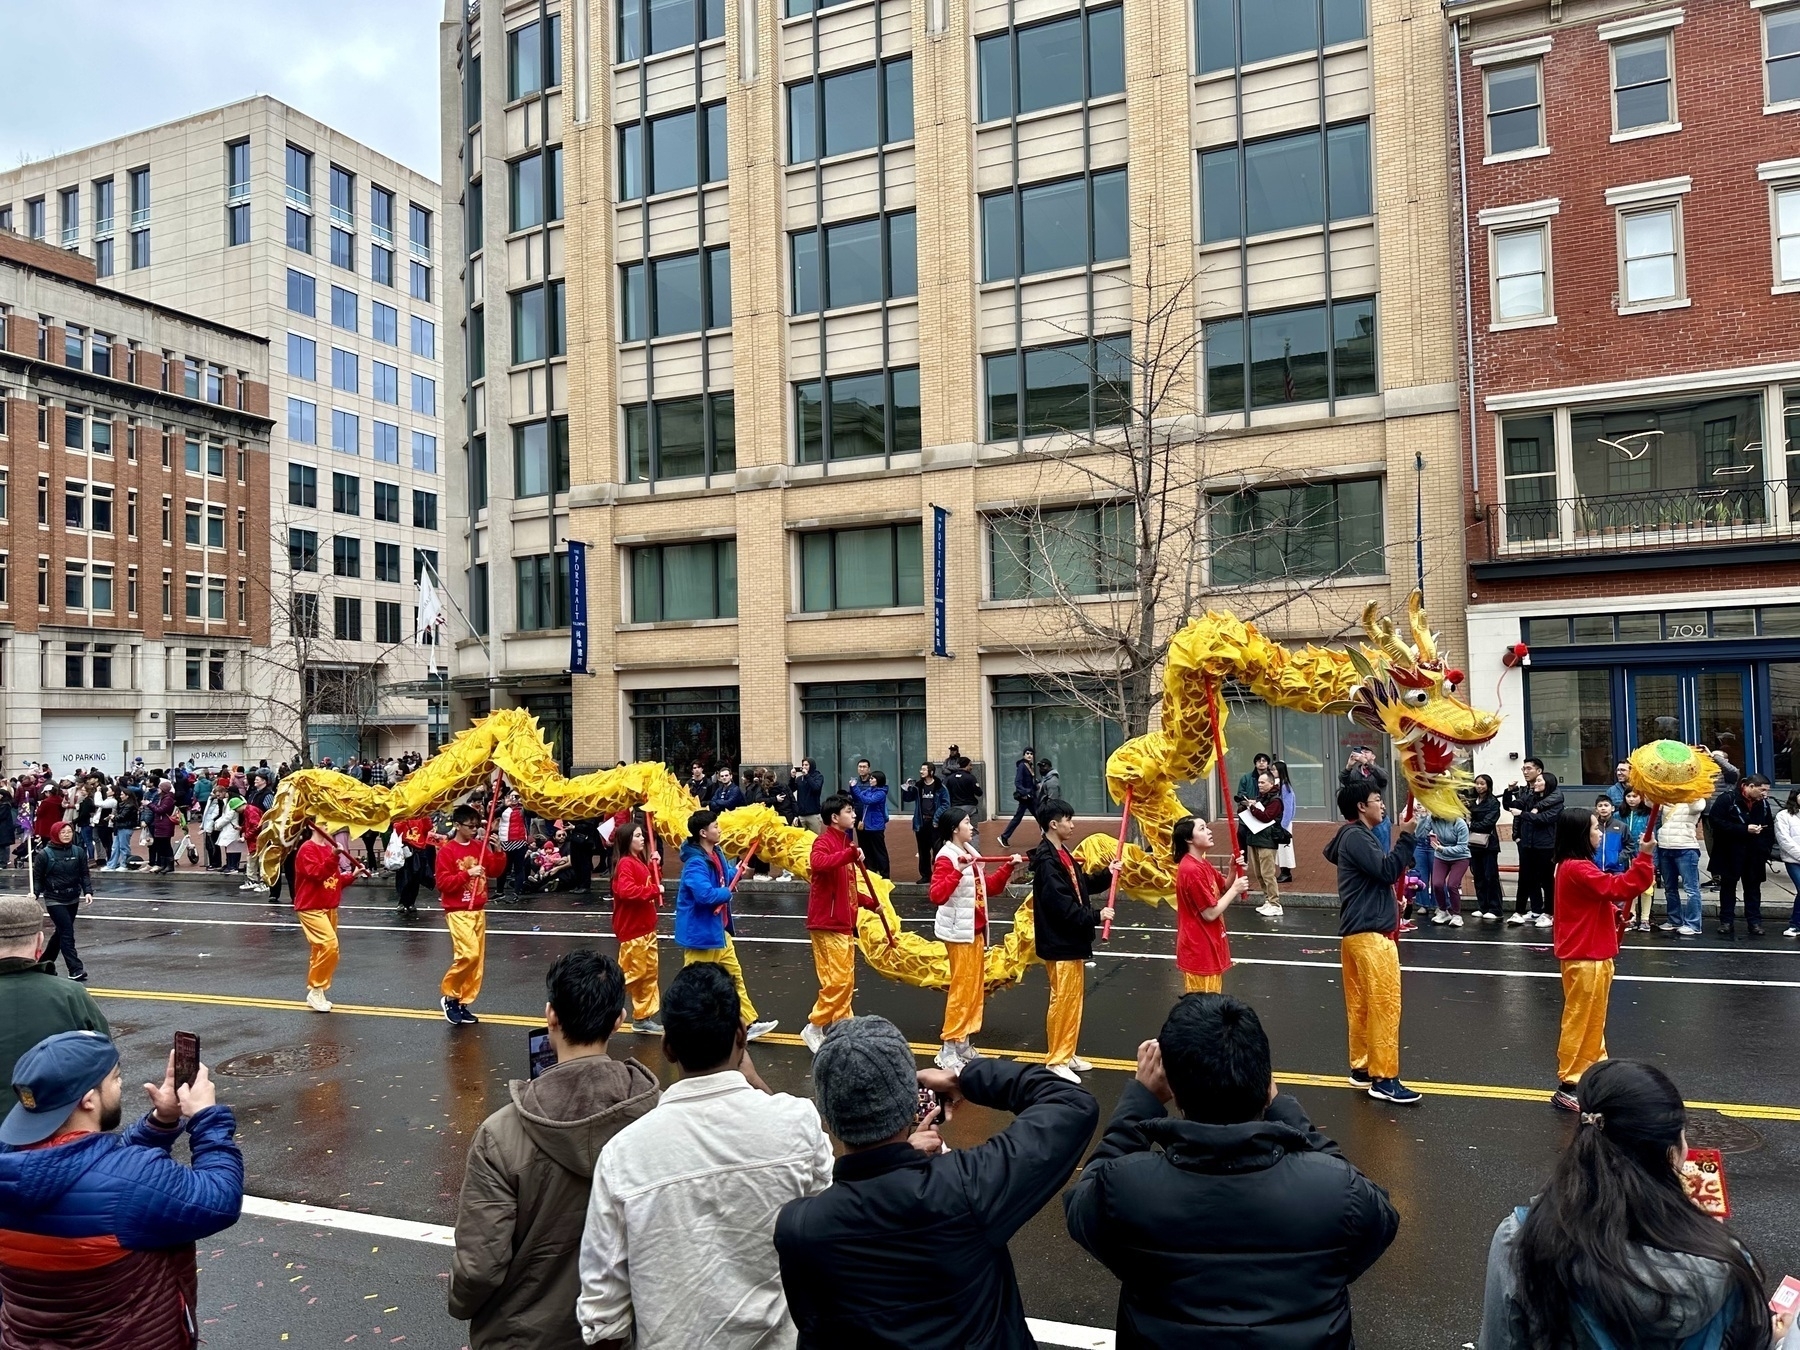 A long yellow Chinese dragon puppet carried by 9 people down a wet street, with spectators looking from both sides.